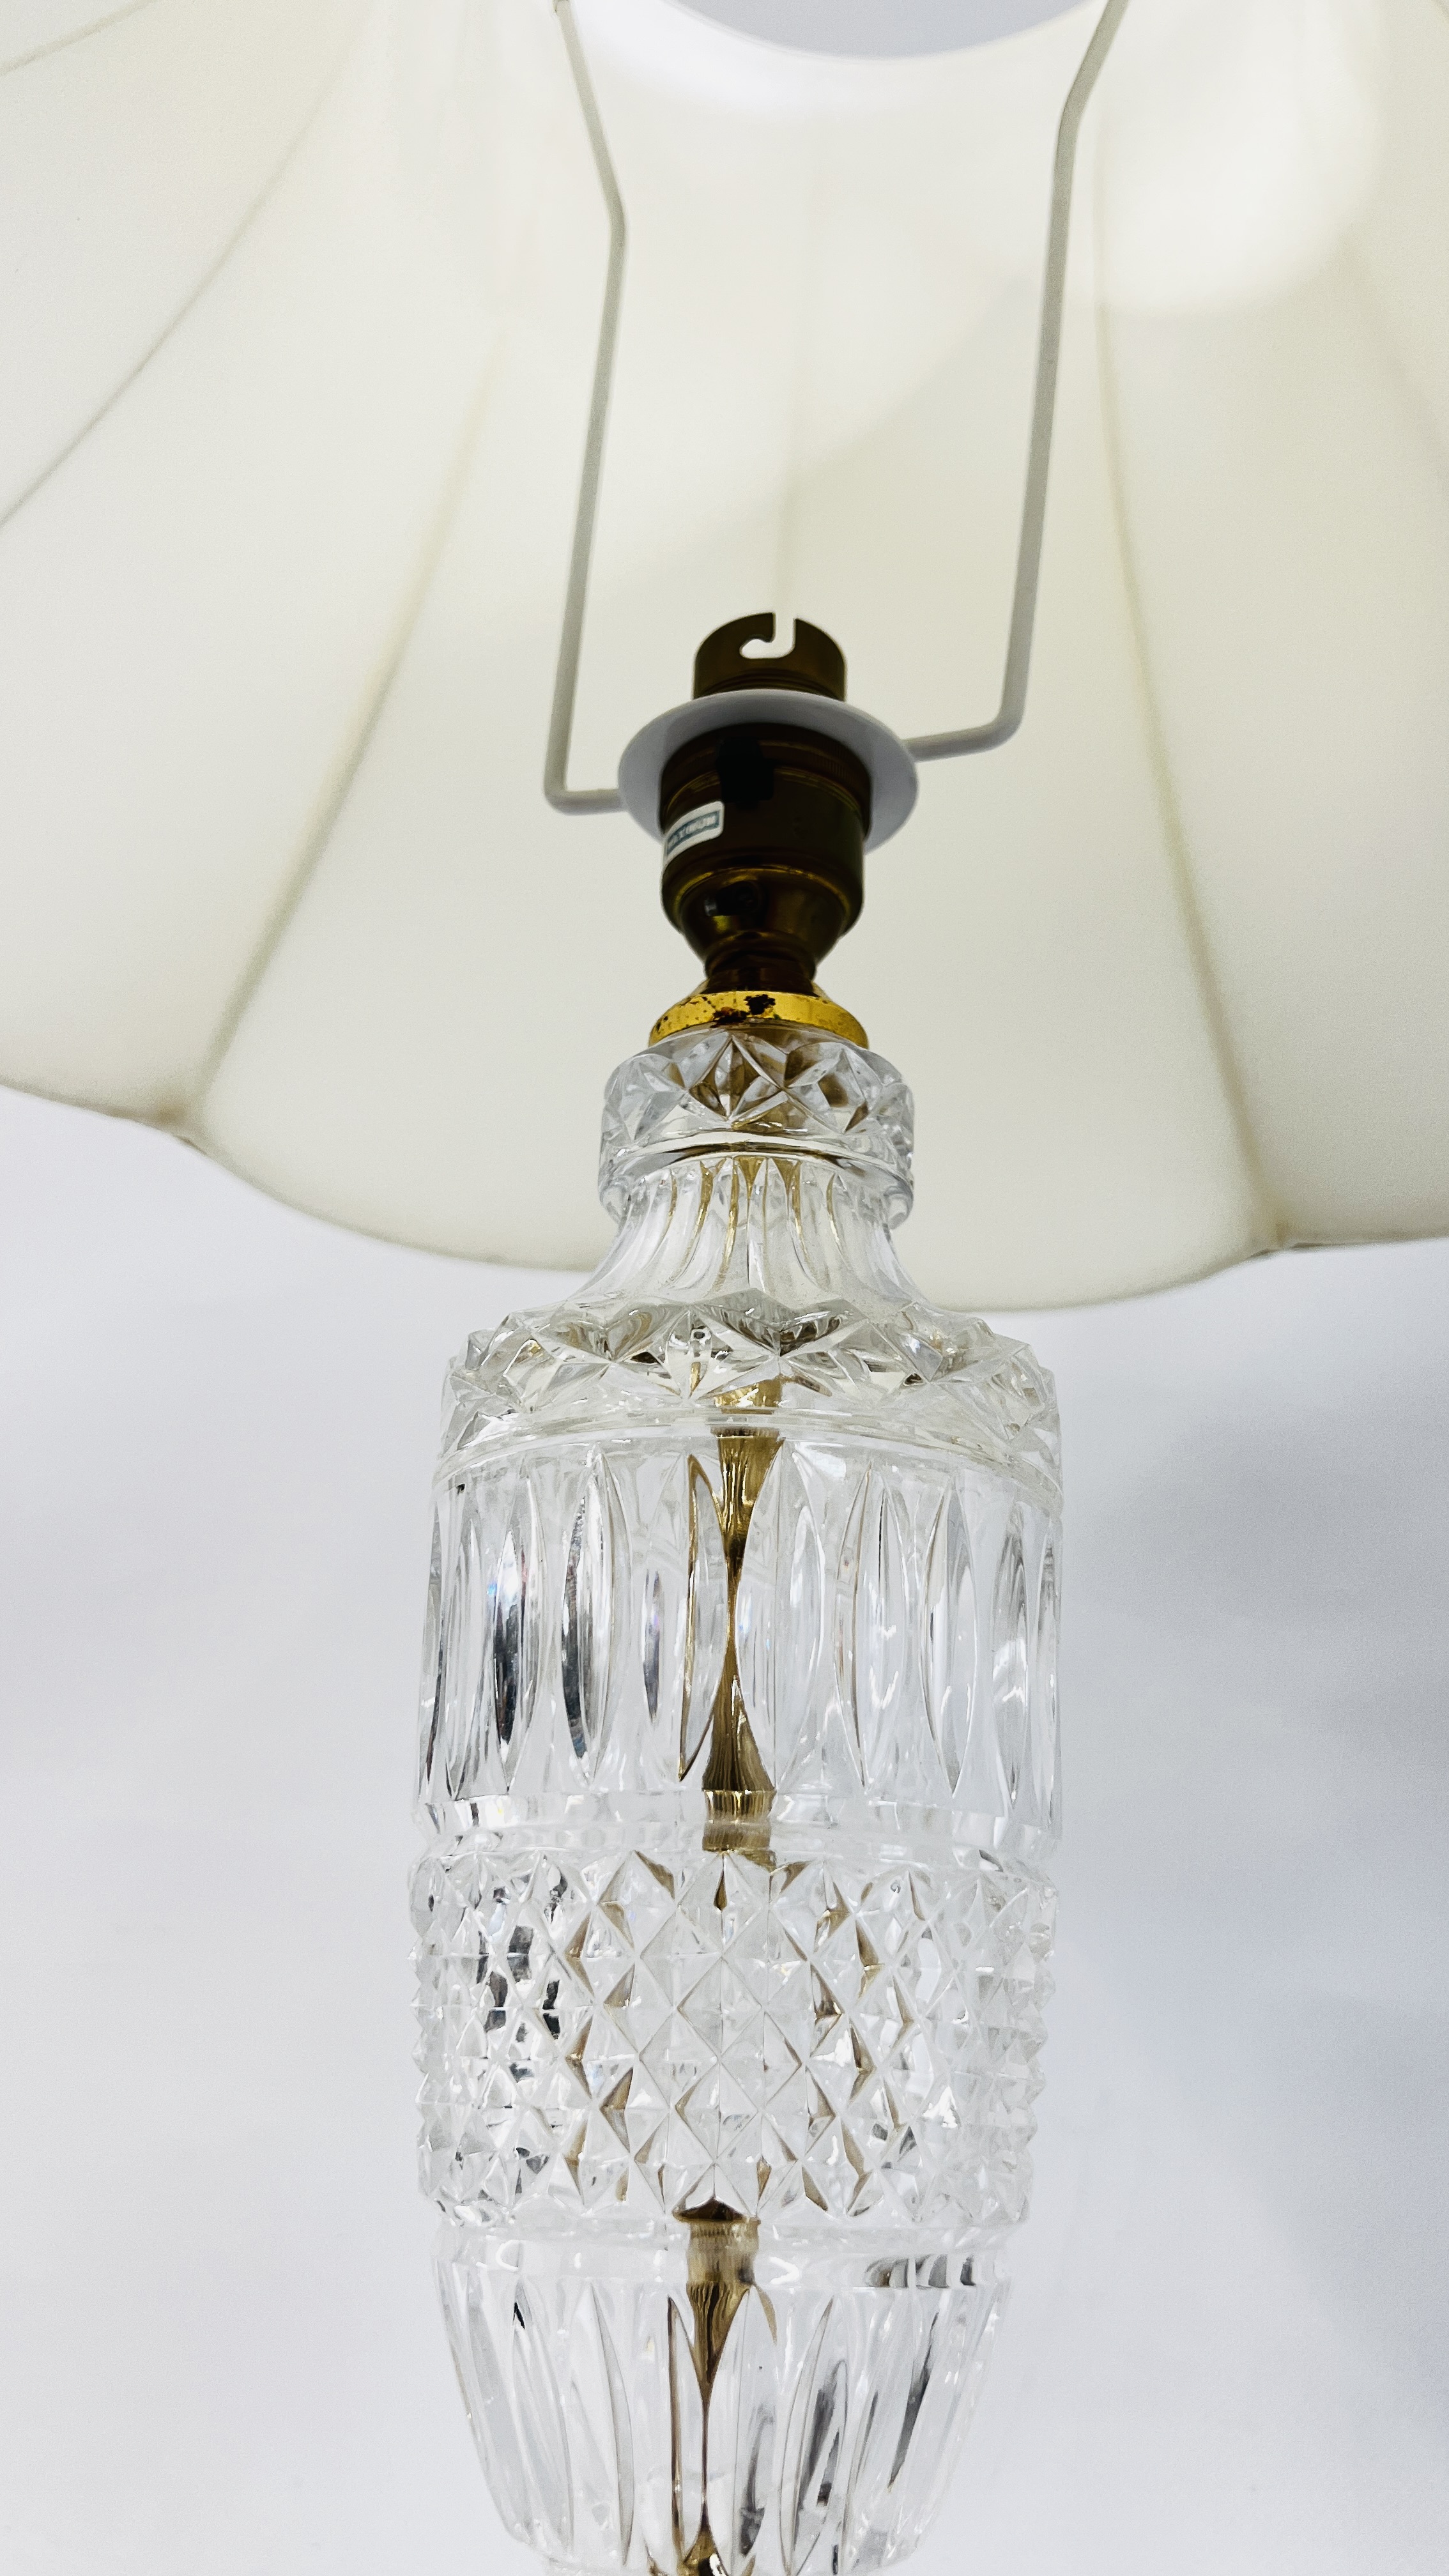 PAIR OF LEAD CRYSTAL TABLE LAMPS WITH CREAM SHADES, OVERALL HEIGHT 58CM - SOLD AS SEEN. - Image 3 of 6